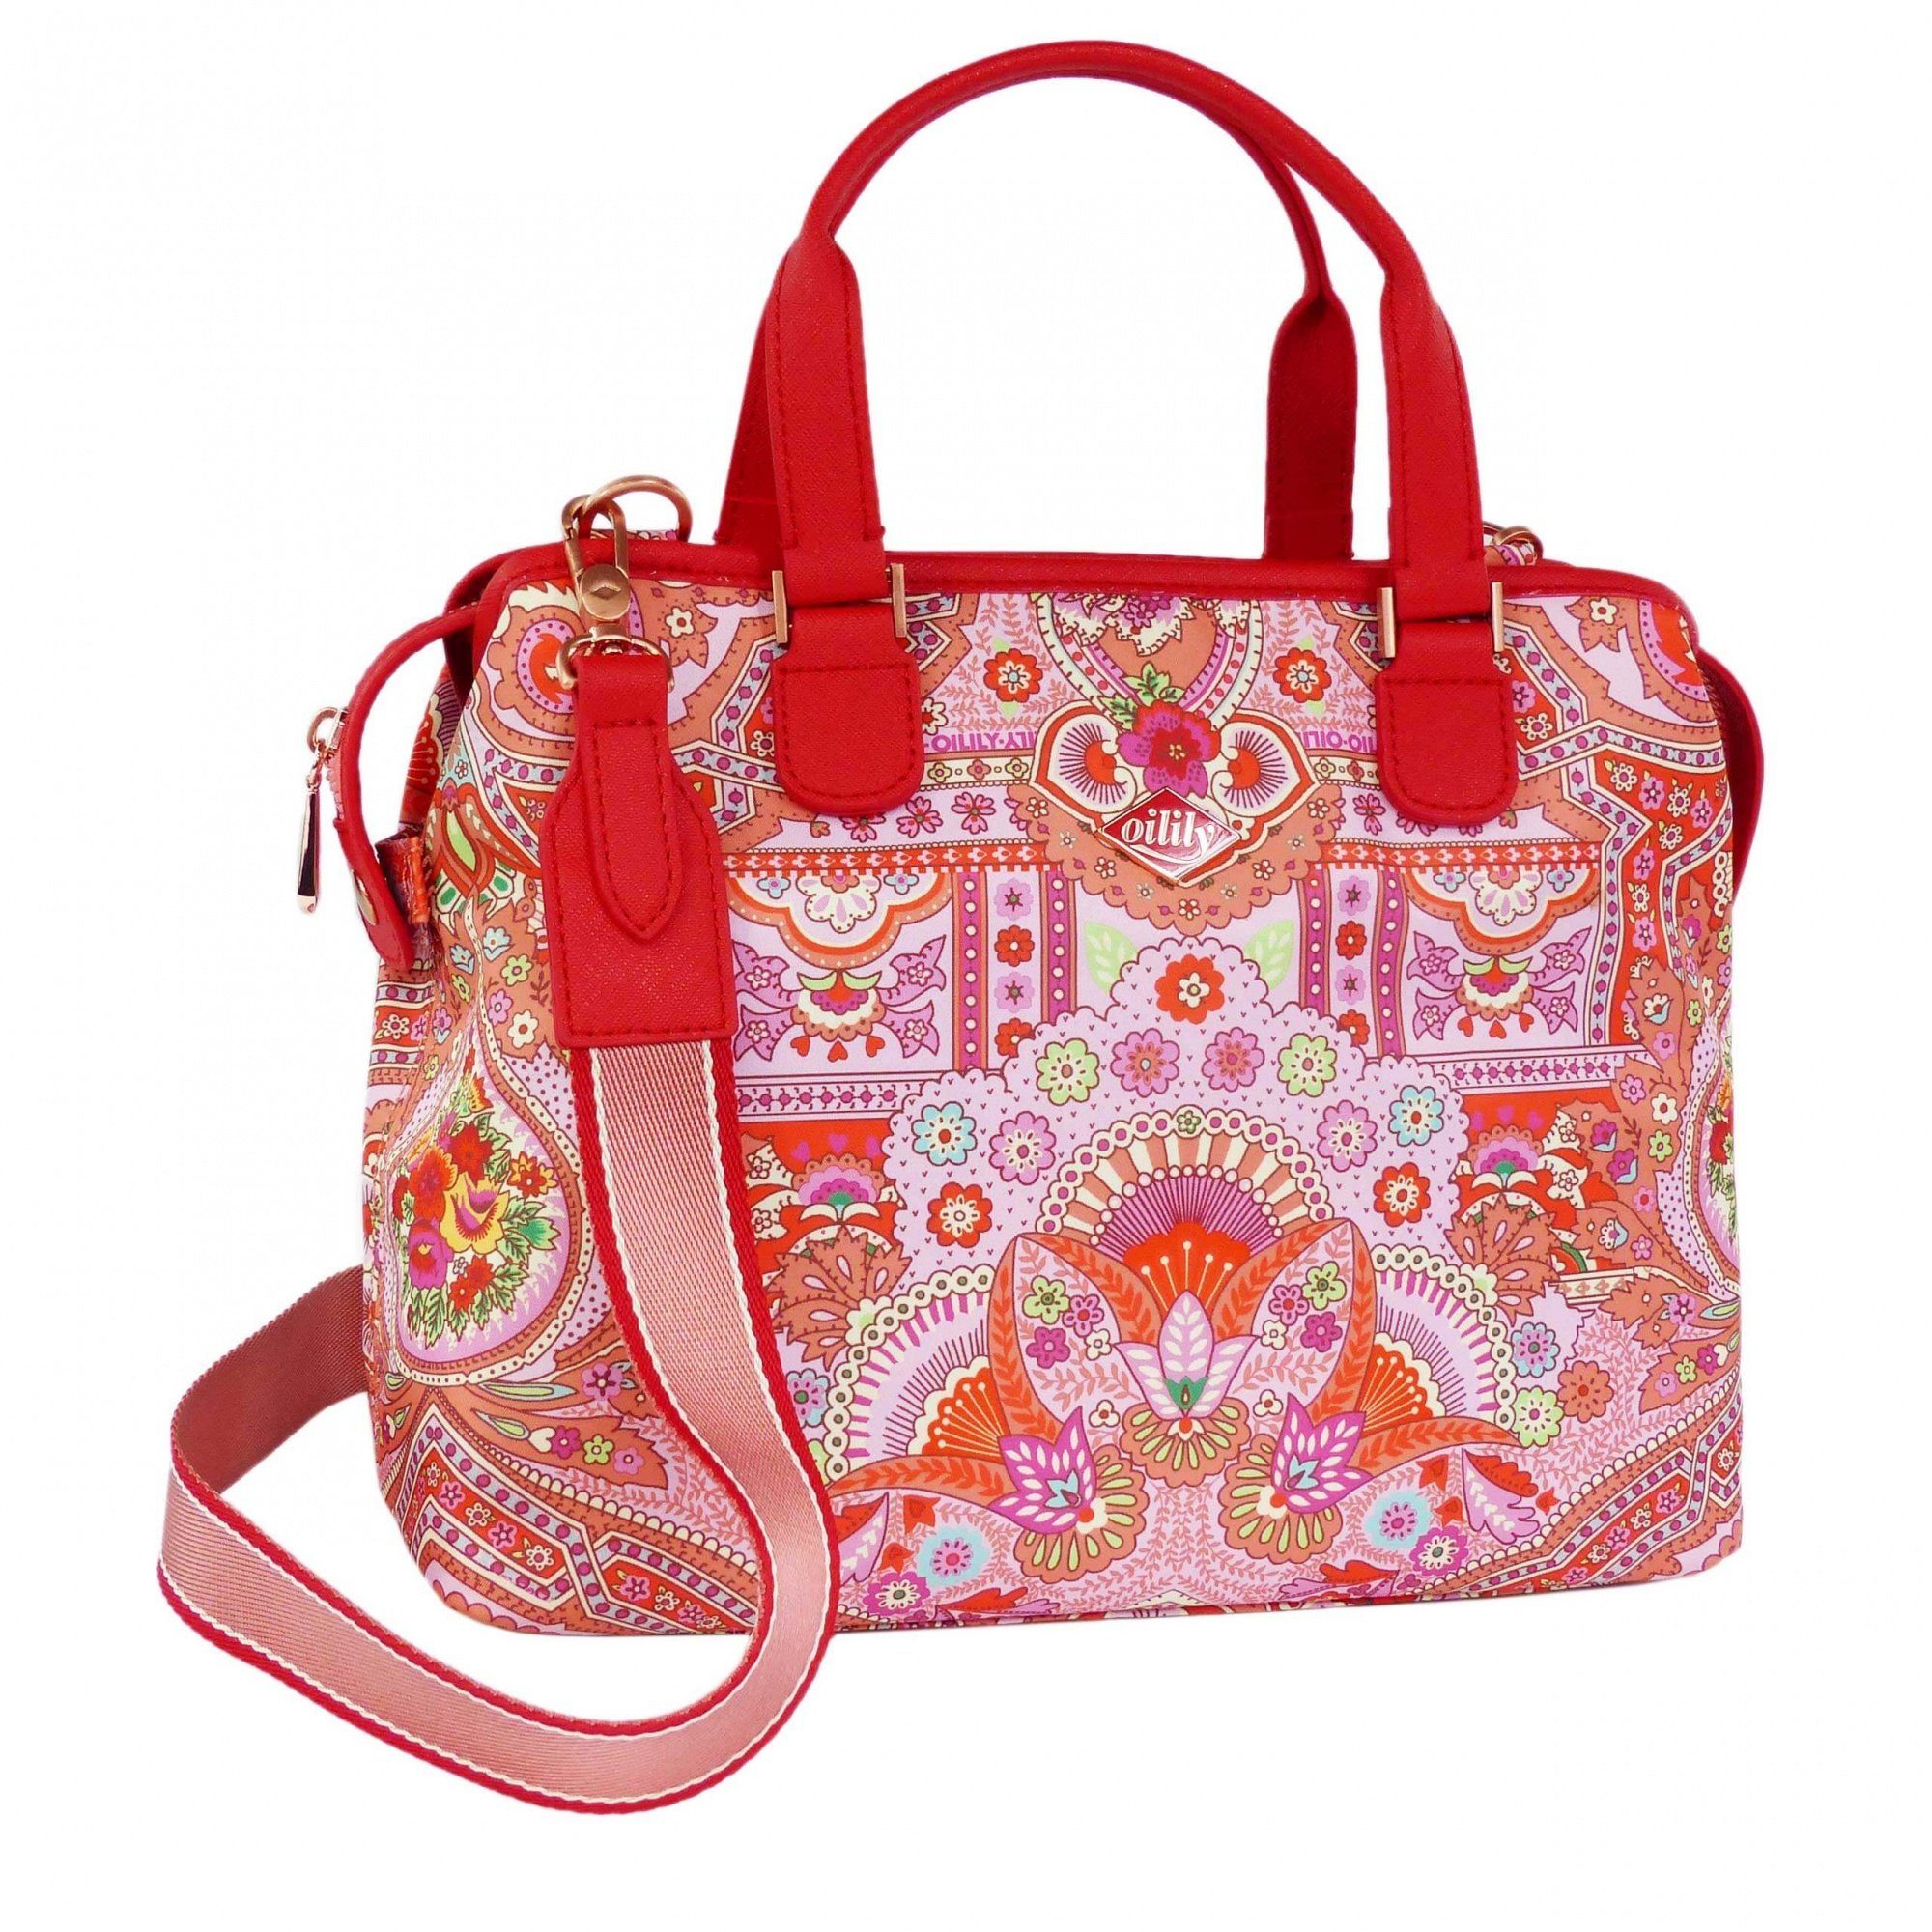 Oilily Handtasche, Oilily Simply Ovation S Handbag OIL0123-115 Old Rose